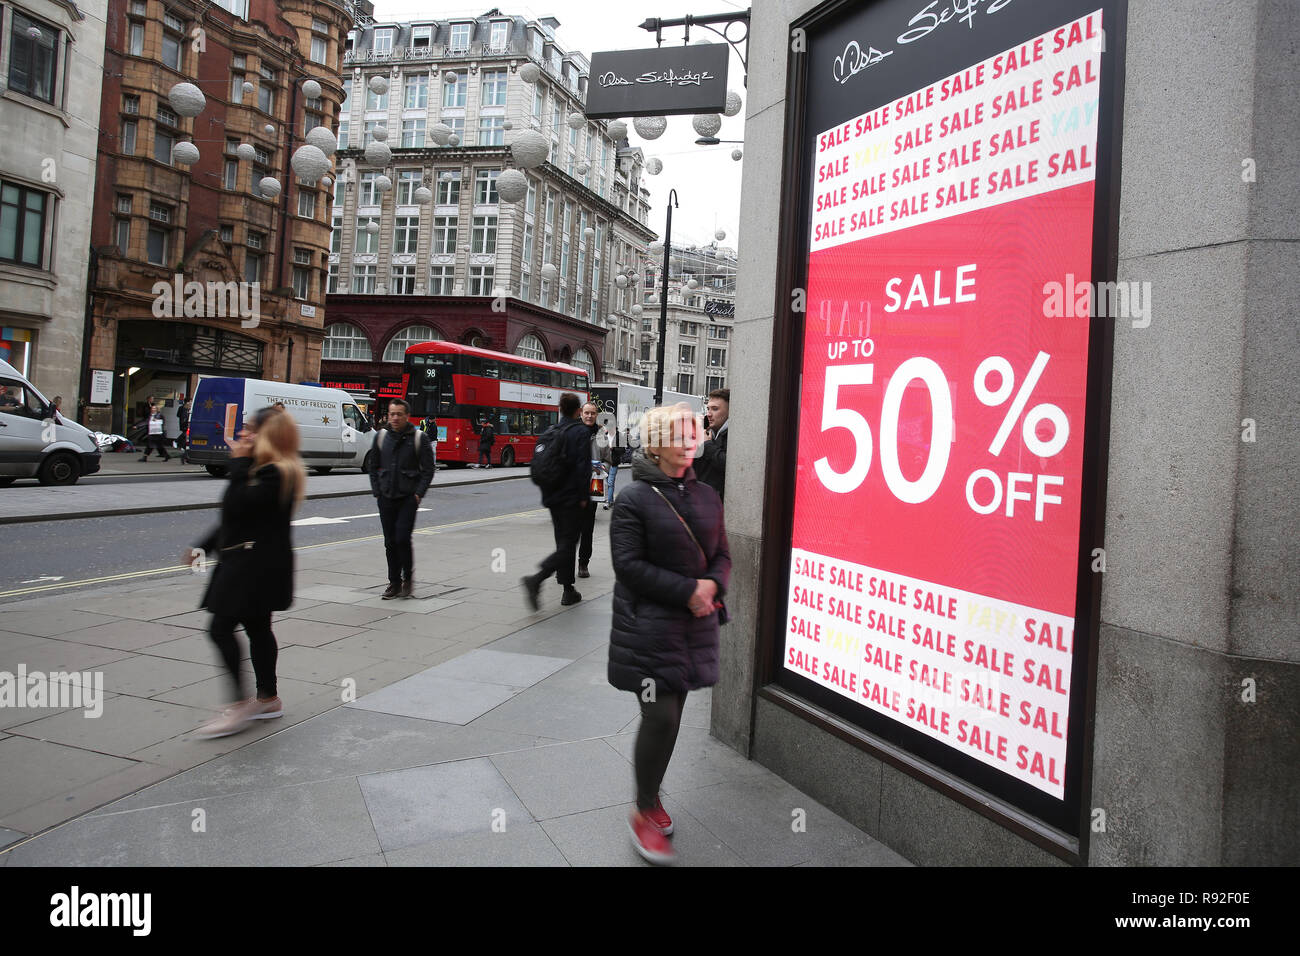 London, UK. 18th December, 2018. The crisis on Britain’s high streets is to intensify this Christmas, with shopkeepers preparing themselves for the quietest festive period since the credit crunch, according to forecasts. Many stores around the country have taken to slashing their prices and starting their sales early such as these in Londons Oxford Street. Credit: Nigel Bowles/Alamy Live News Stock Photo